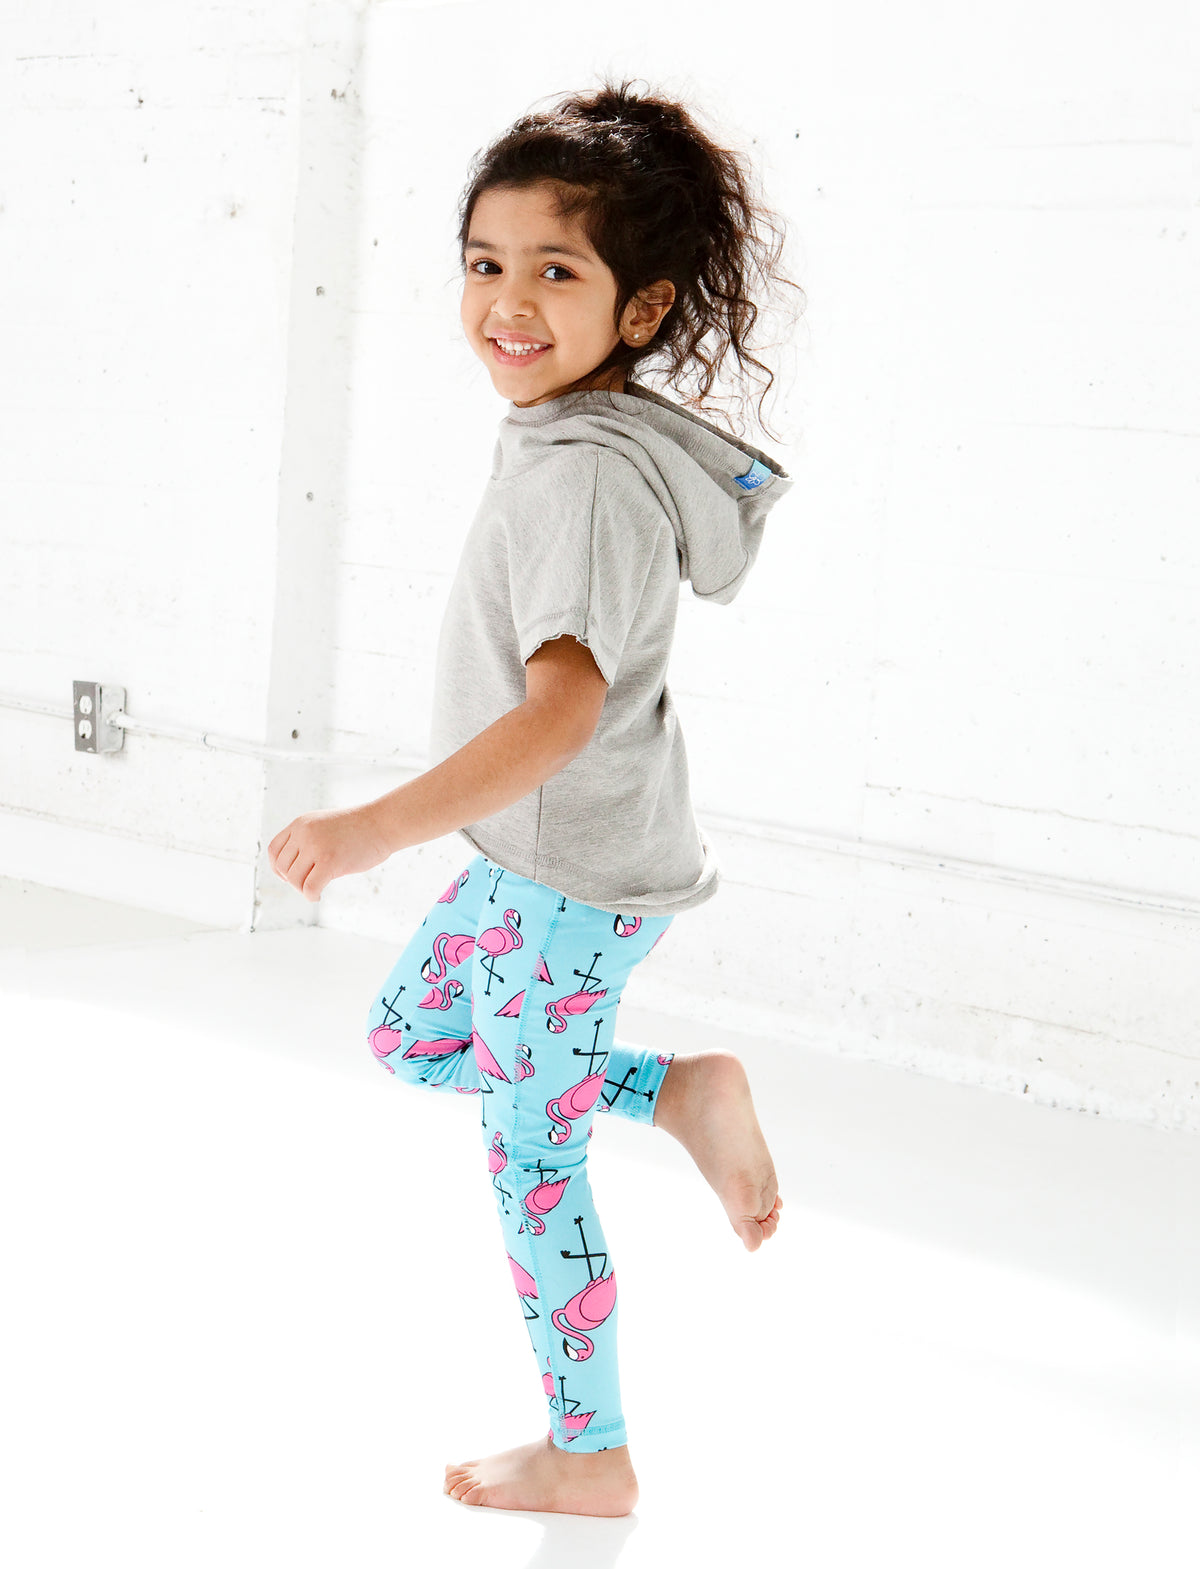 GIRLS 2-6 PRINTED LEGGING Jill Yoga Go online to visit us! We have what  you're looking for